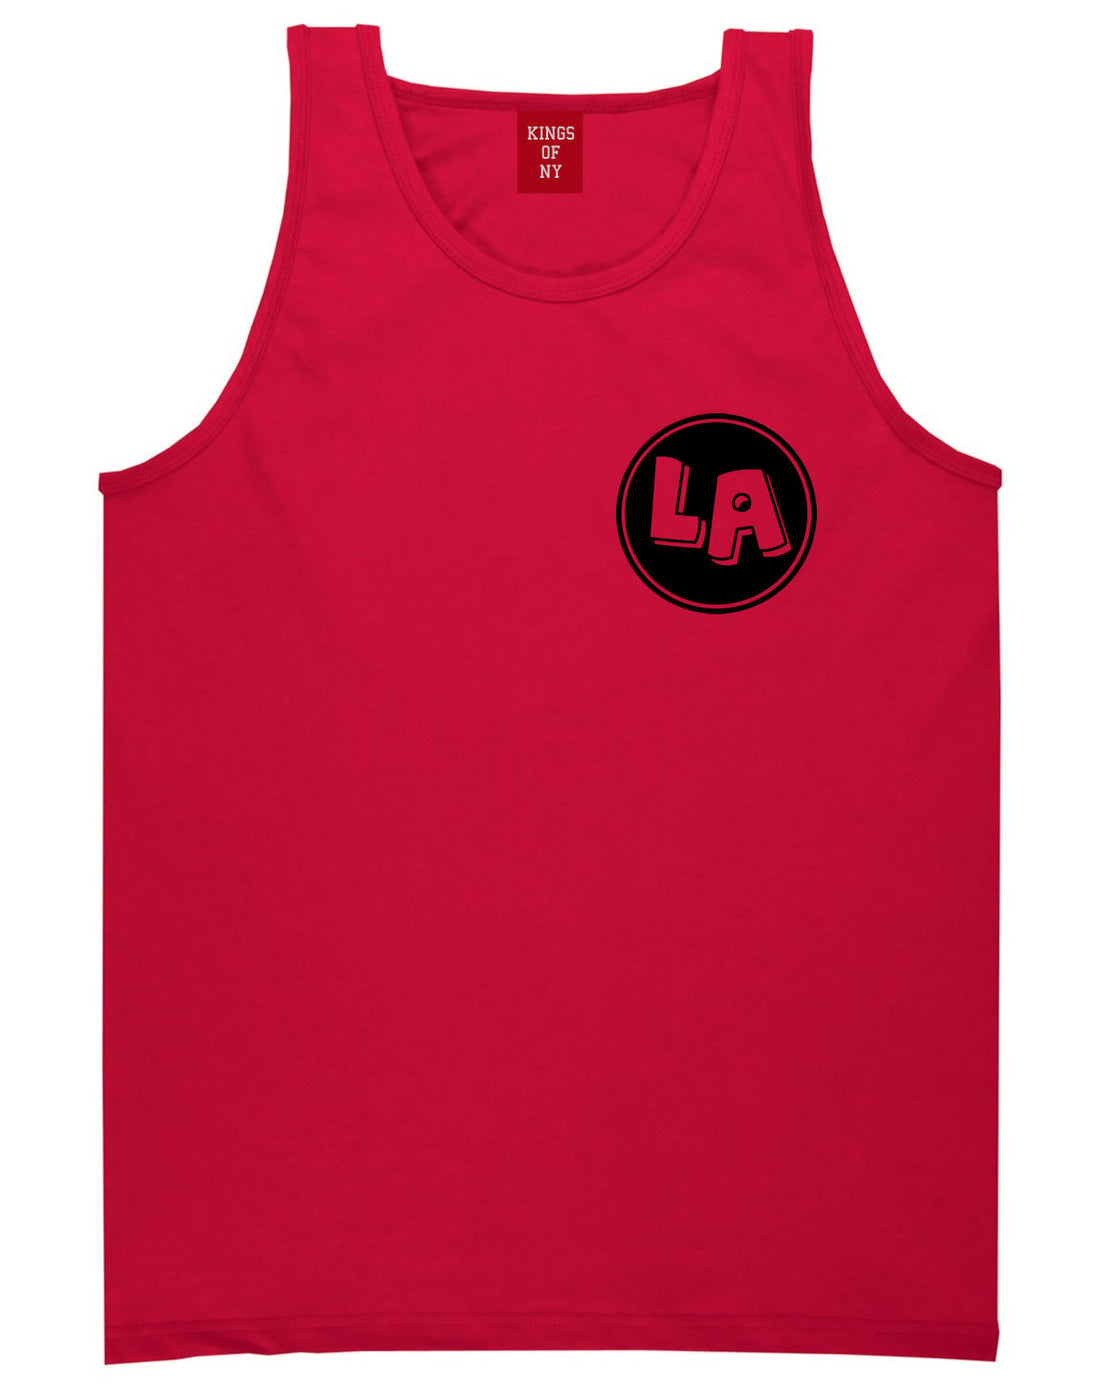 LA Circle Chest Los Angeles Tank Top in Red By Kings Of NY